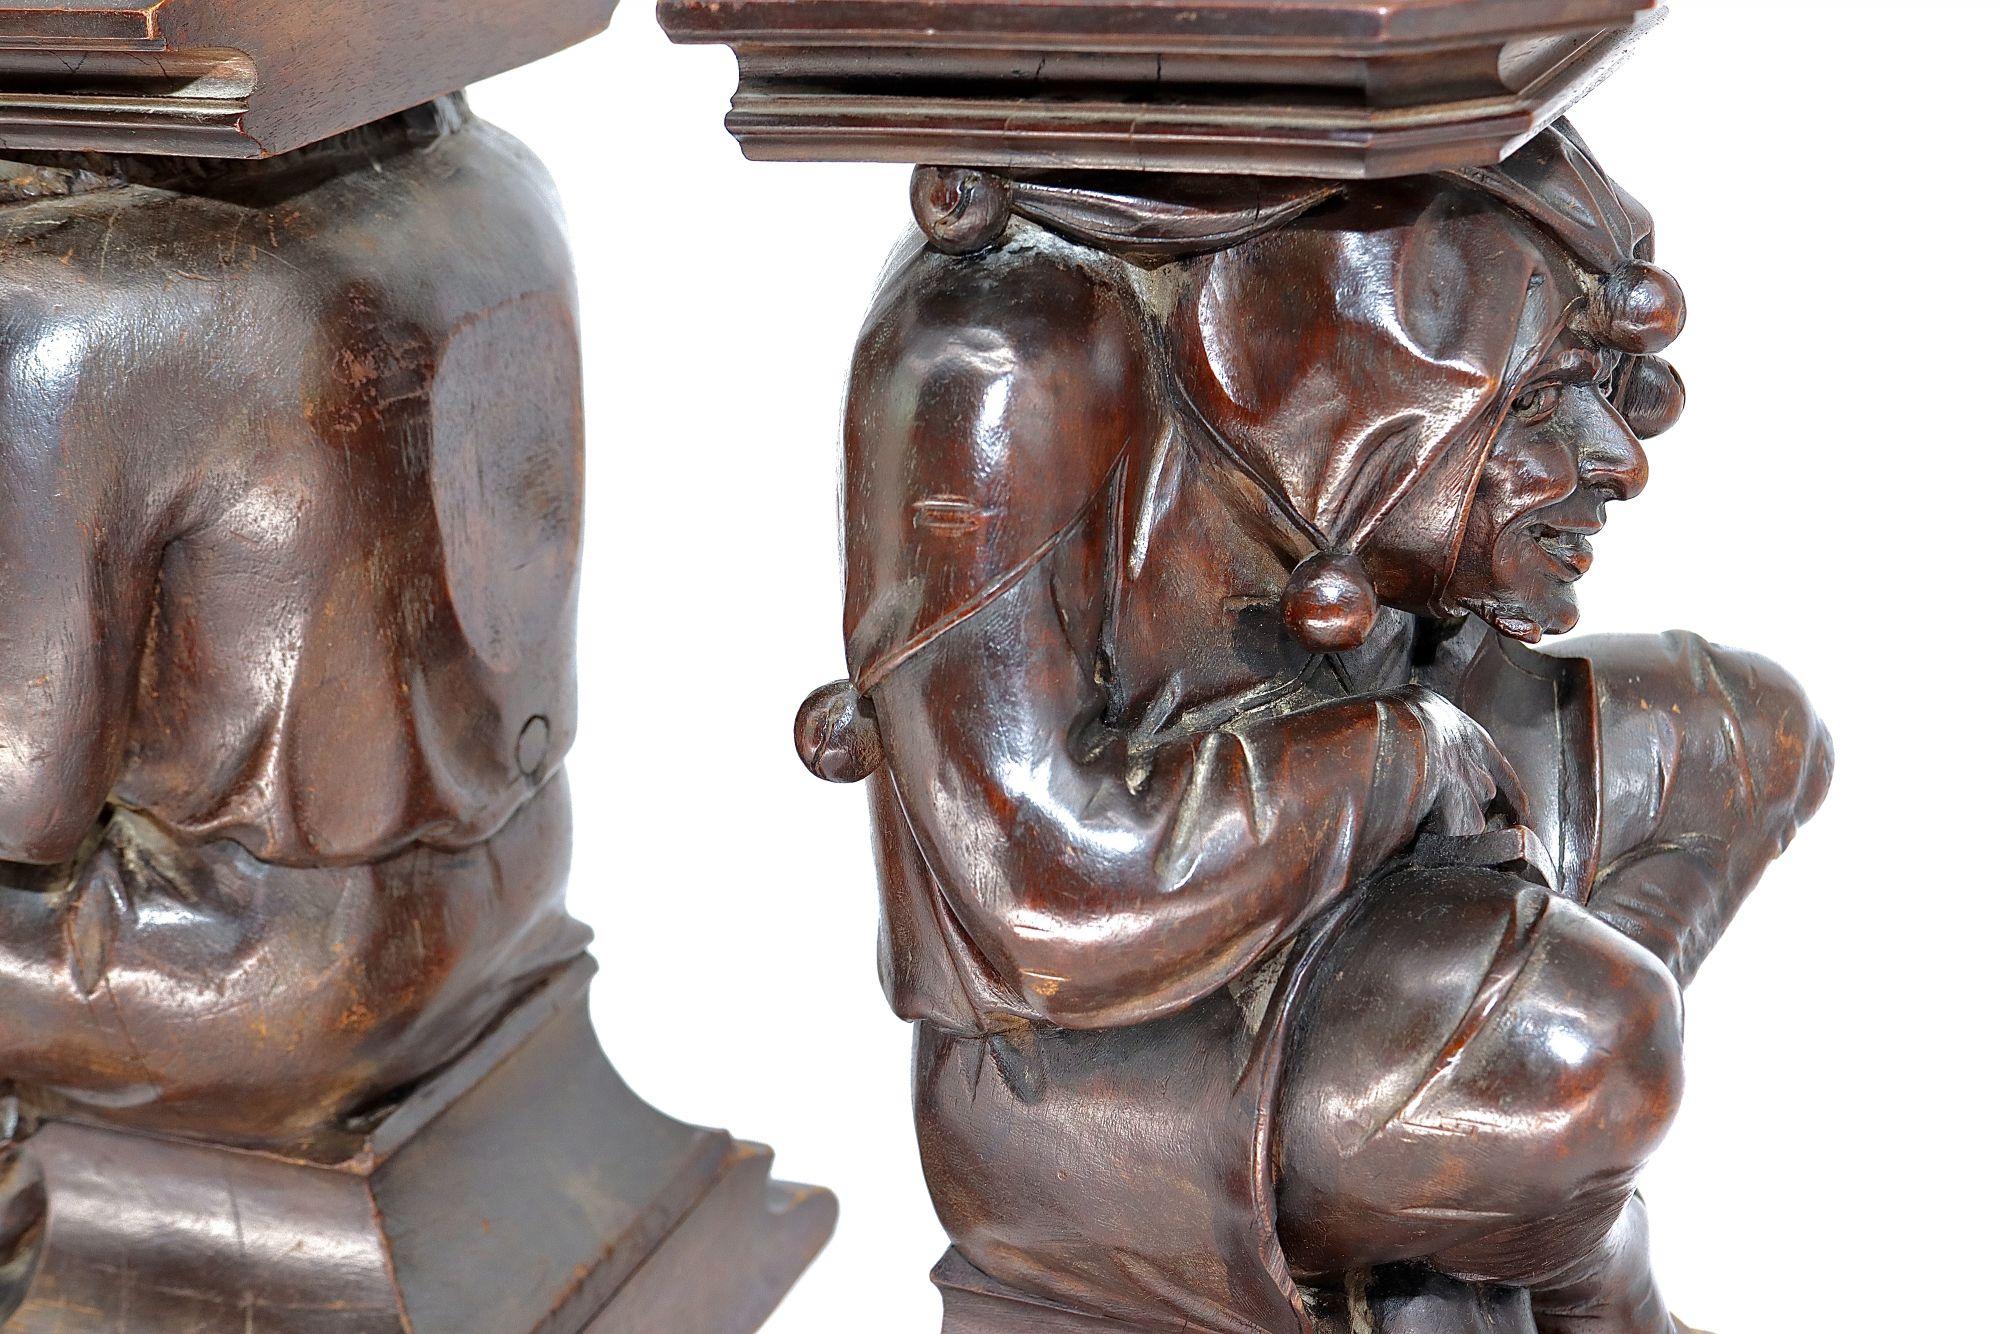 Baroque Monumental Pair of English Carved Walnut Wood Figures of Court Jesters, 18th C For Sale